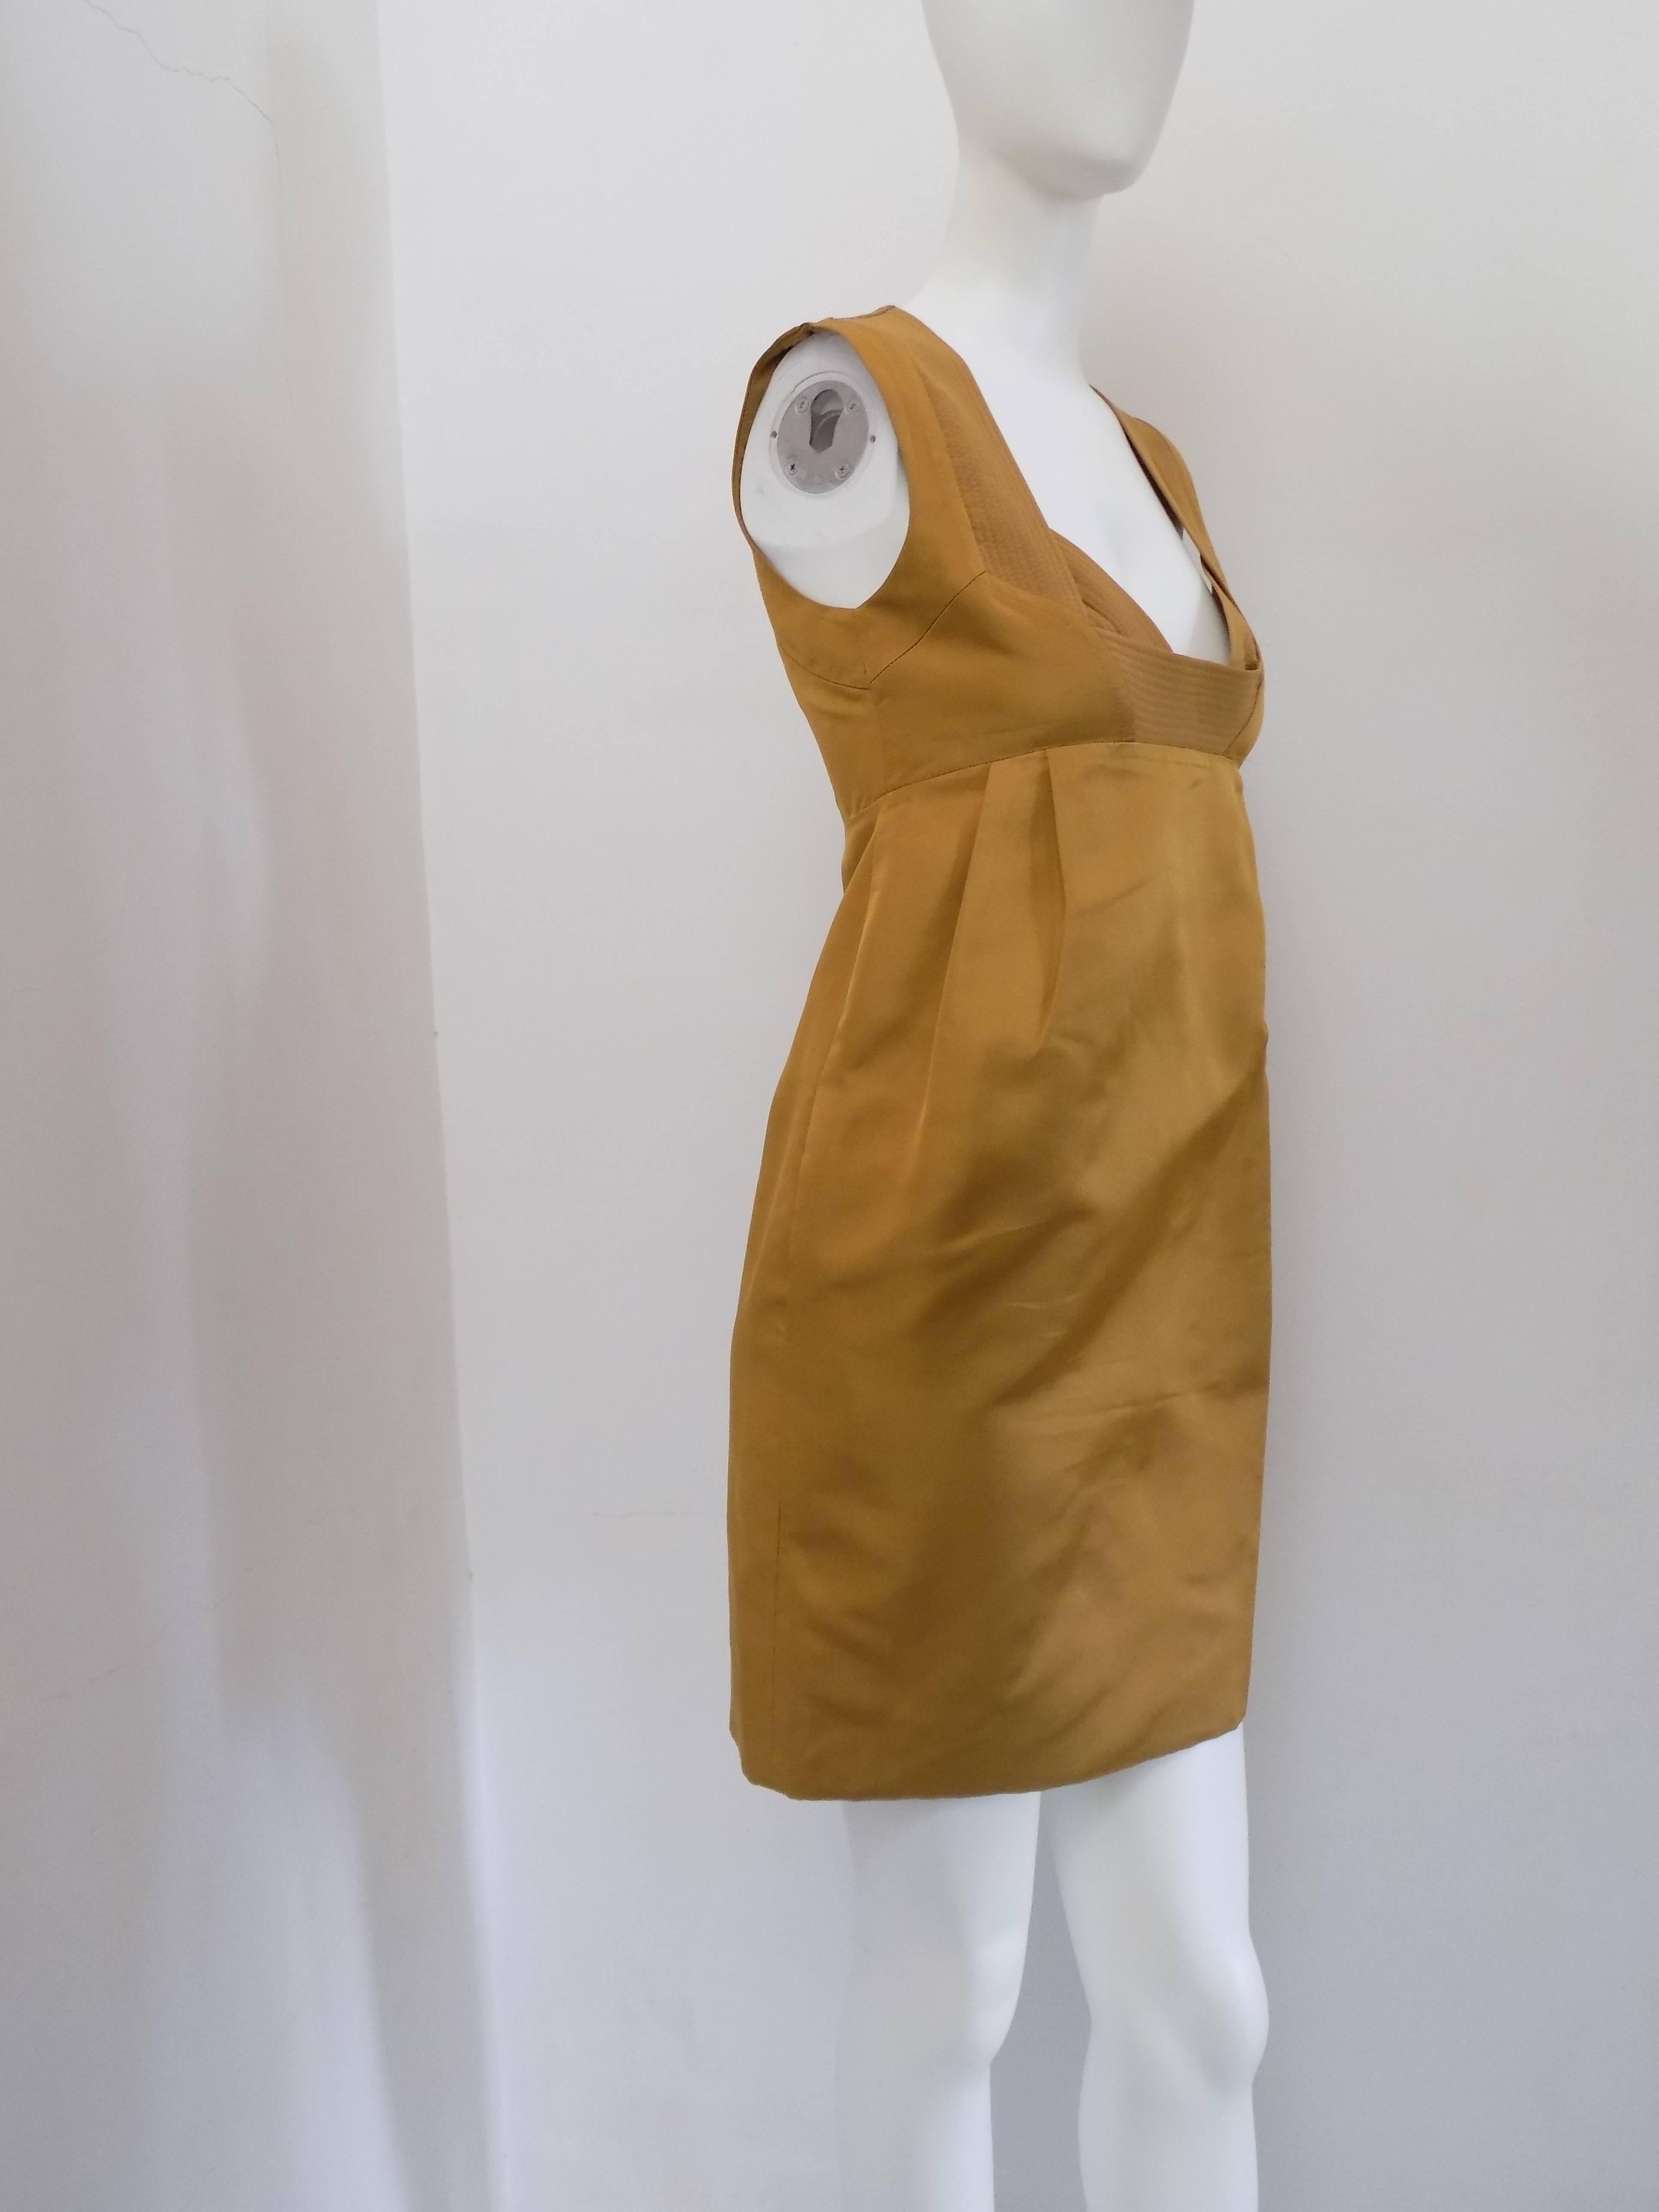 1990 Gucci Ocra Dress

Totally made in italy in italian size range 38

Composition: 100 silk

Lining 74 silk 26 acetate